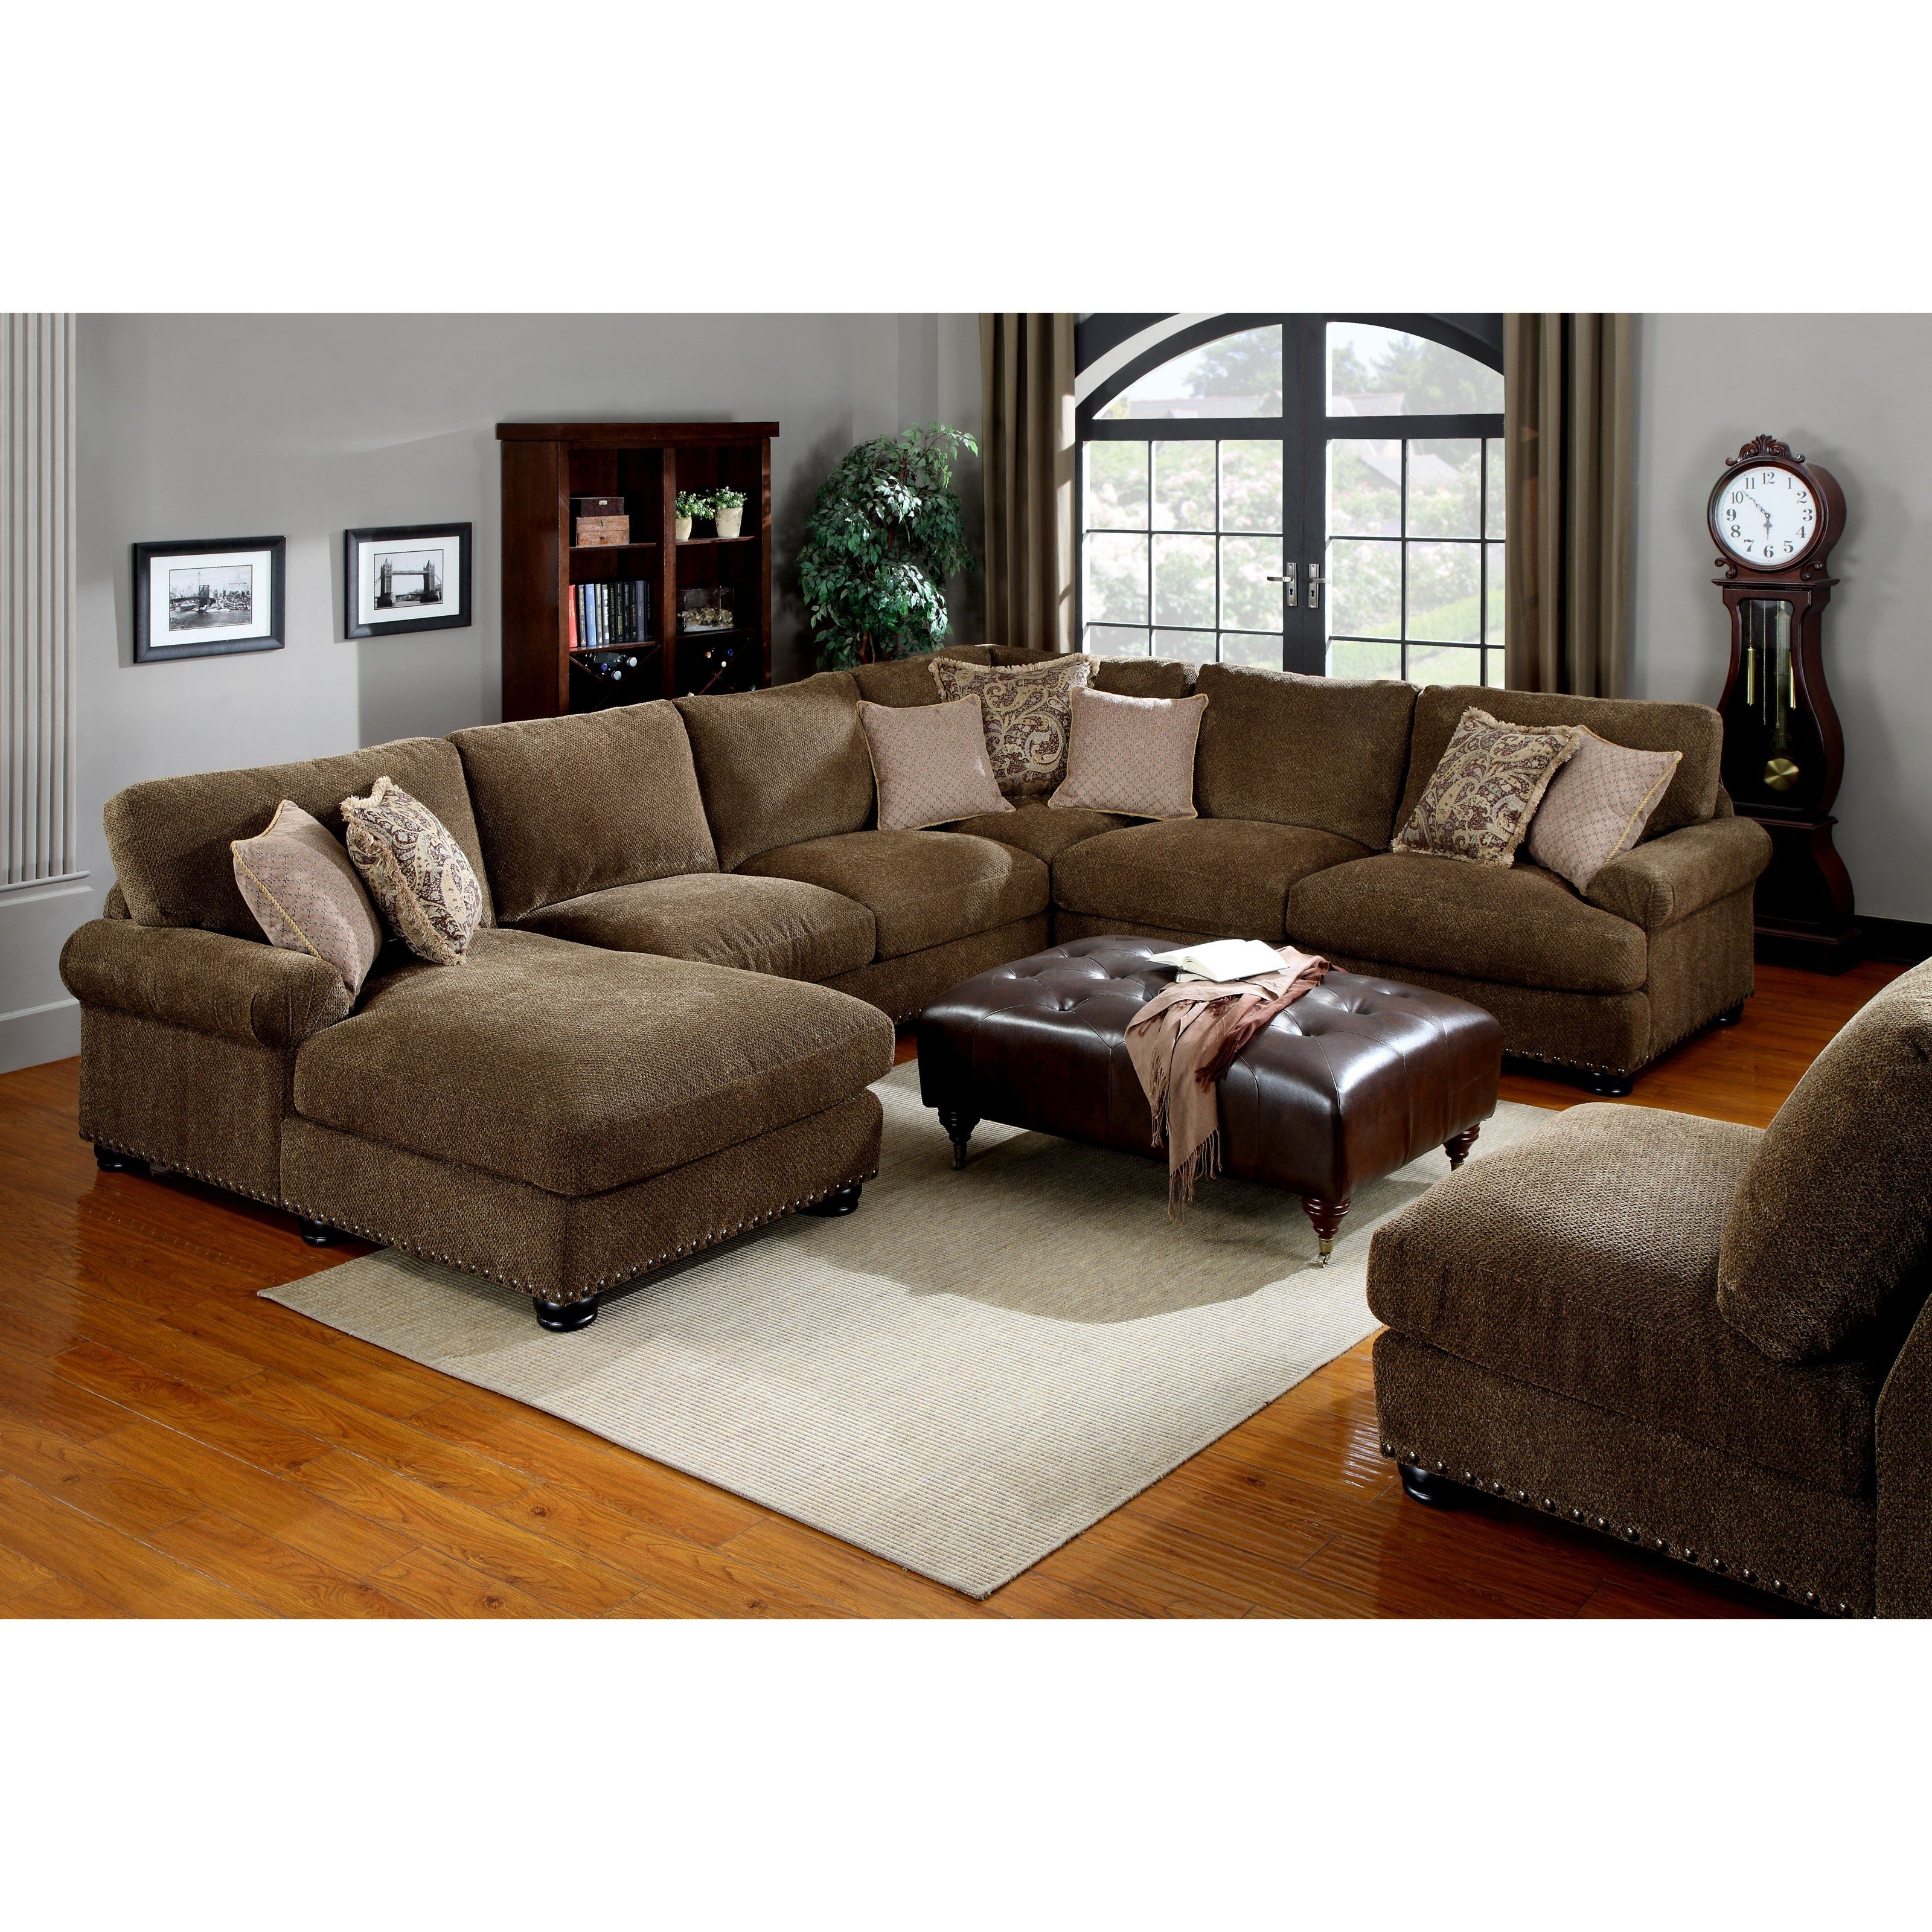 Cozy Chenille Sectional Sofas 13 For 10 Foot Sectional Sofa With Intended For 10 Foot Sectional Sofa (View 8 of 12)